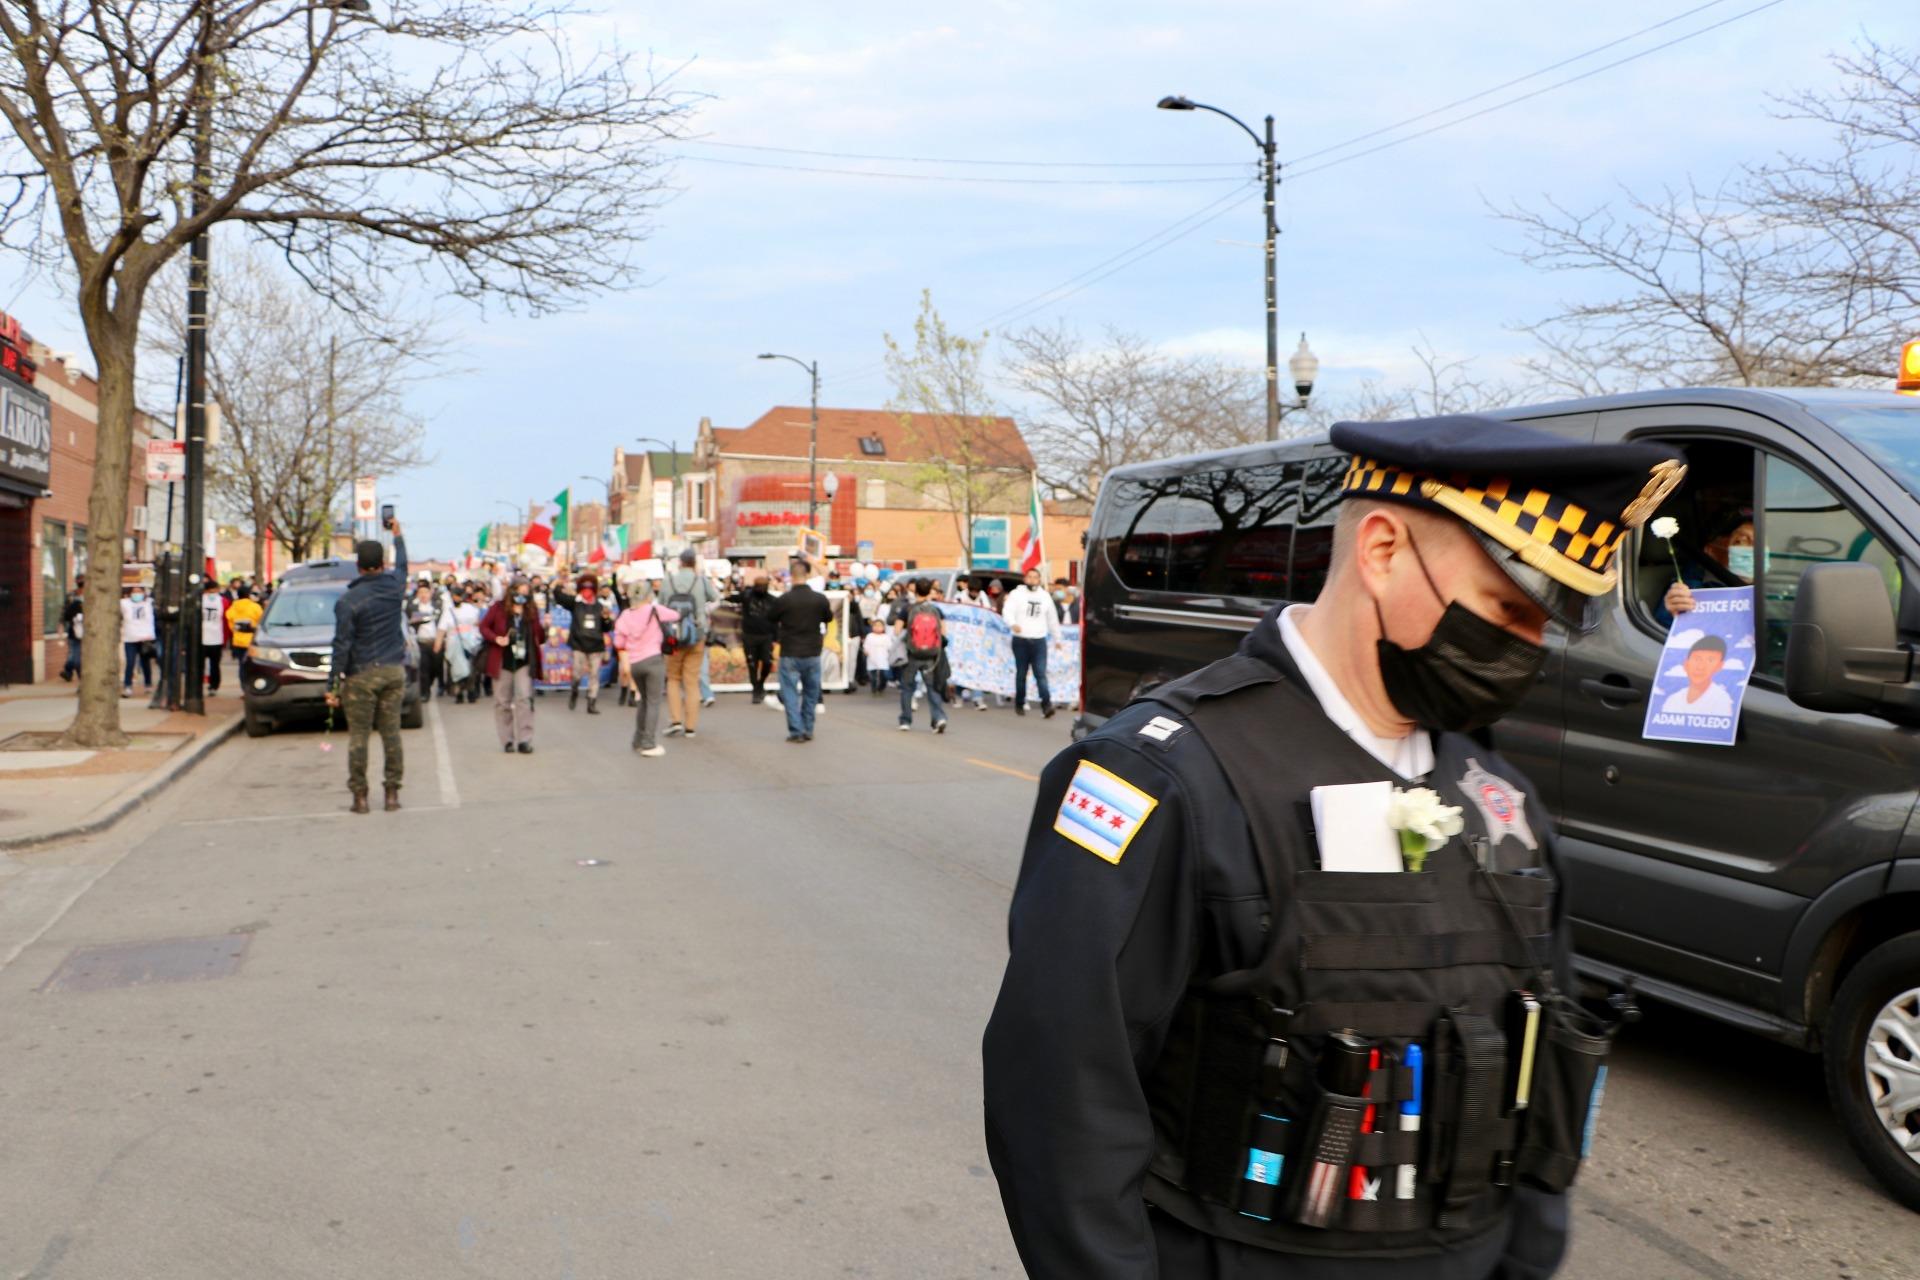 A police officer walks ahead of the march through Chicago’s Little Village neighborhood during the Adam Toledo peace walk on April 18, 2021. (Evan Garcia / WTTW News)